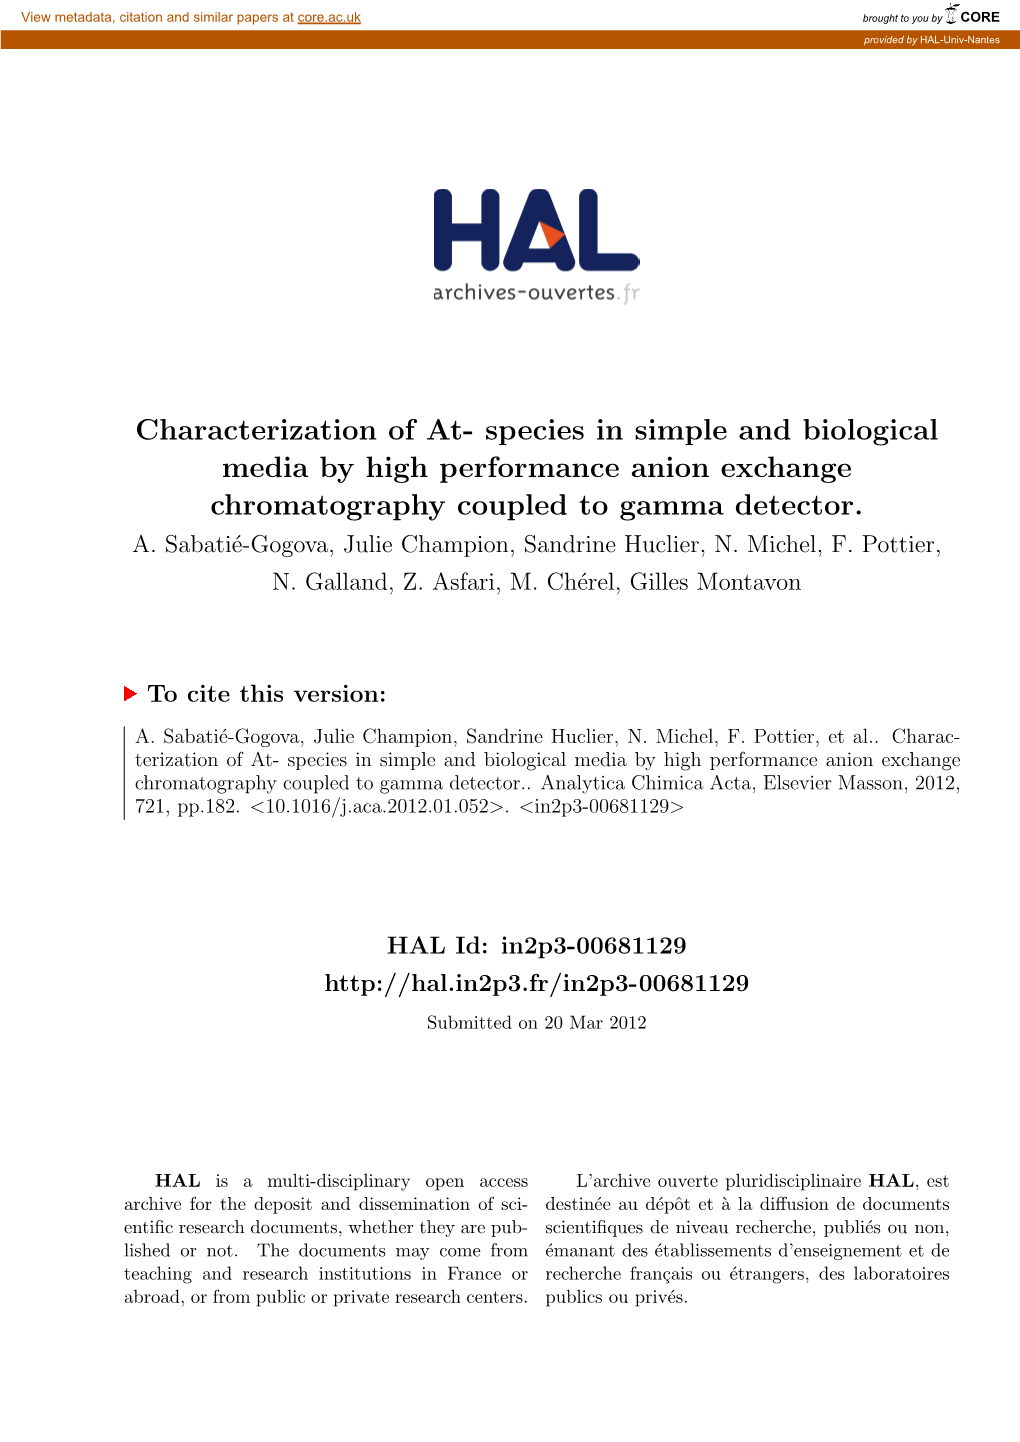 characterization-of-at-species-in-simple-and-biological-media-by-high